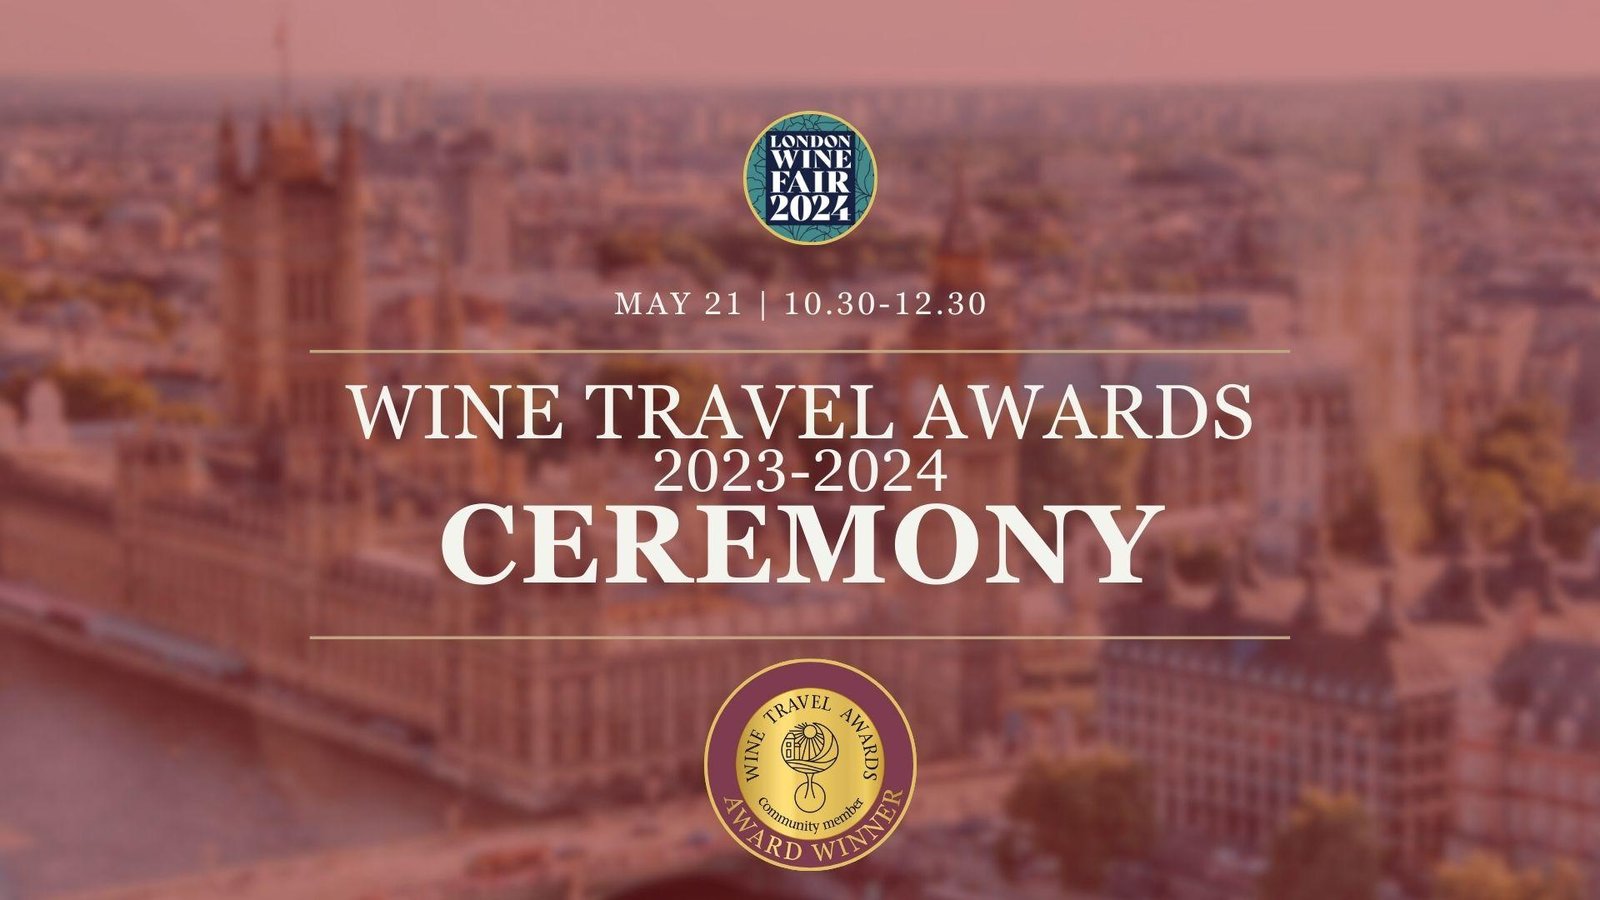 Don’t miss the Wine Travel Awards Ceremony 2023–2024!